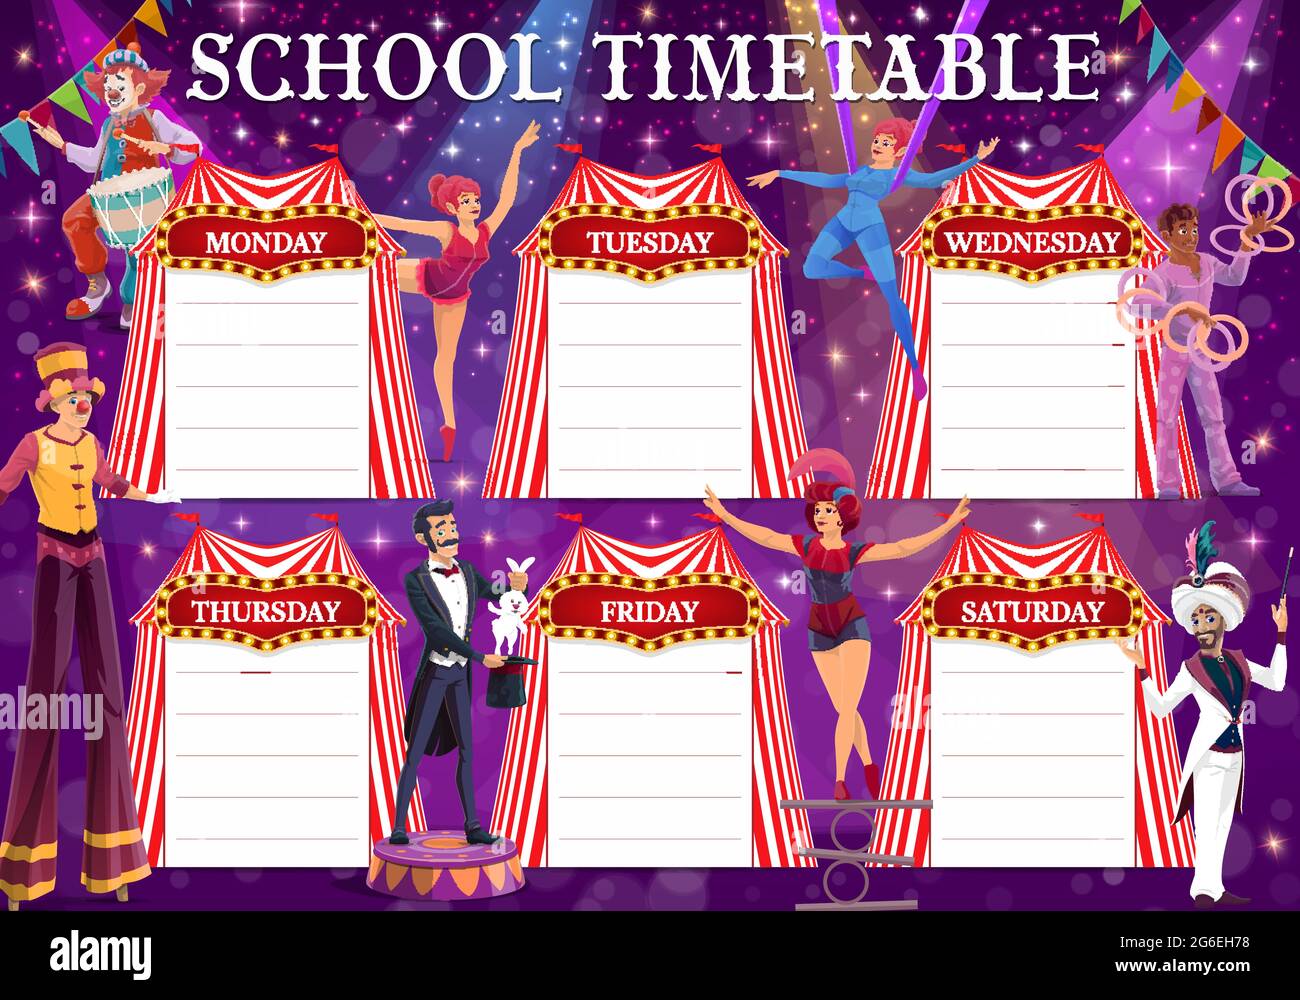 Shapito circus education timetable vector schedule. School timetable, study plan or weekly planner of student lessons in background frame of top tents Stock Vector